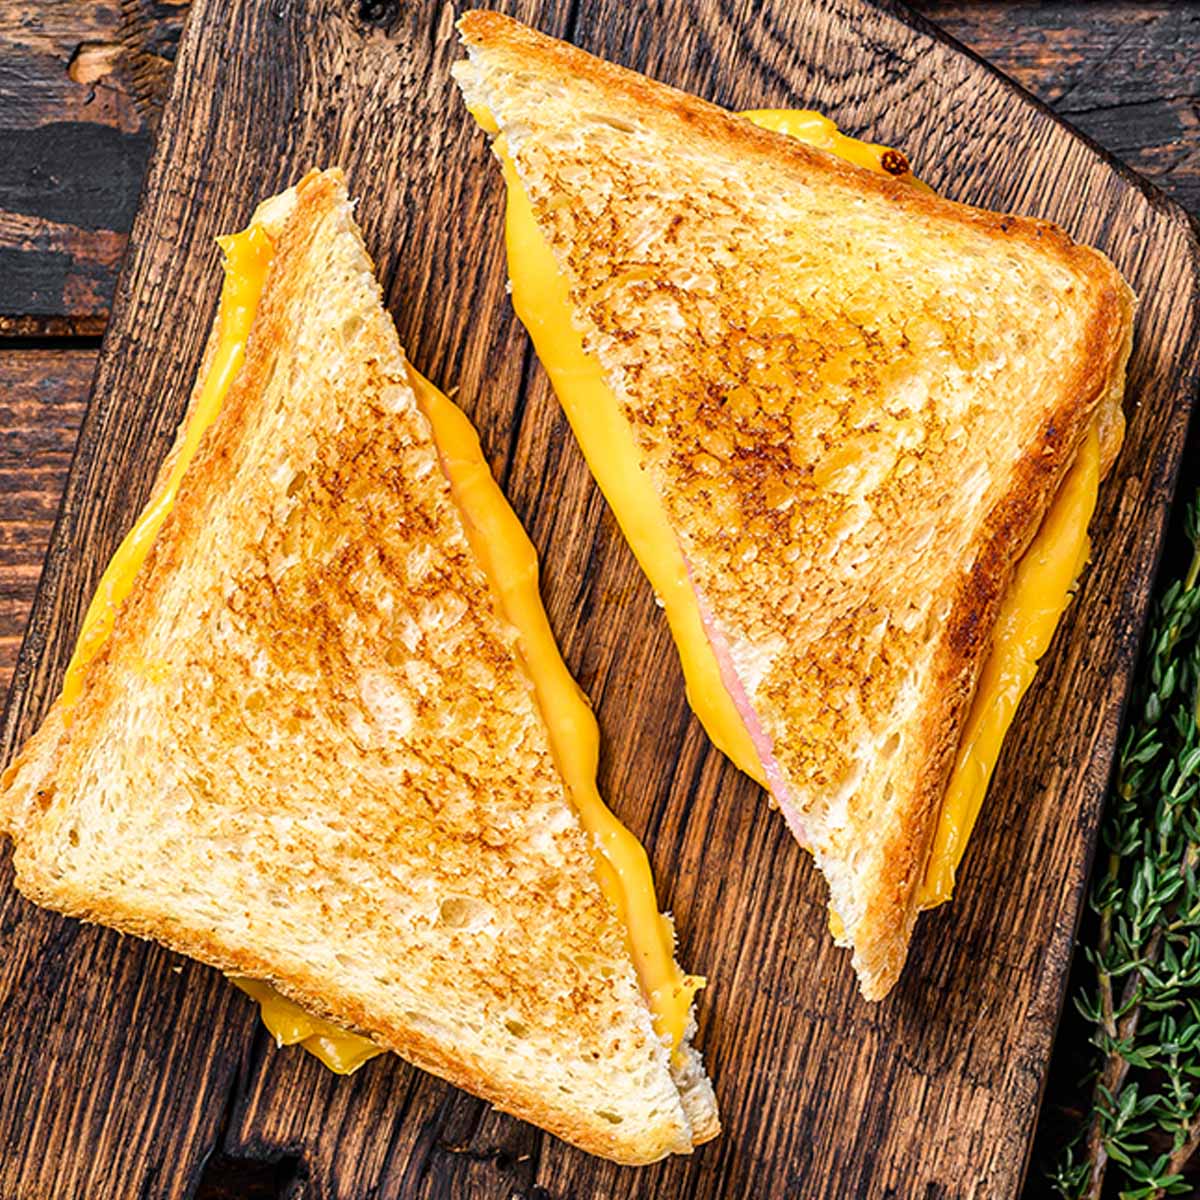 People have been eating bread and cheese for centuries, but the first grilled cheese sandwiches to appear in the States were back in the 1920s, and they were pretty basic. 